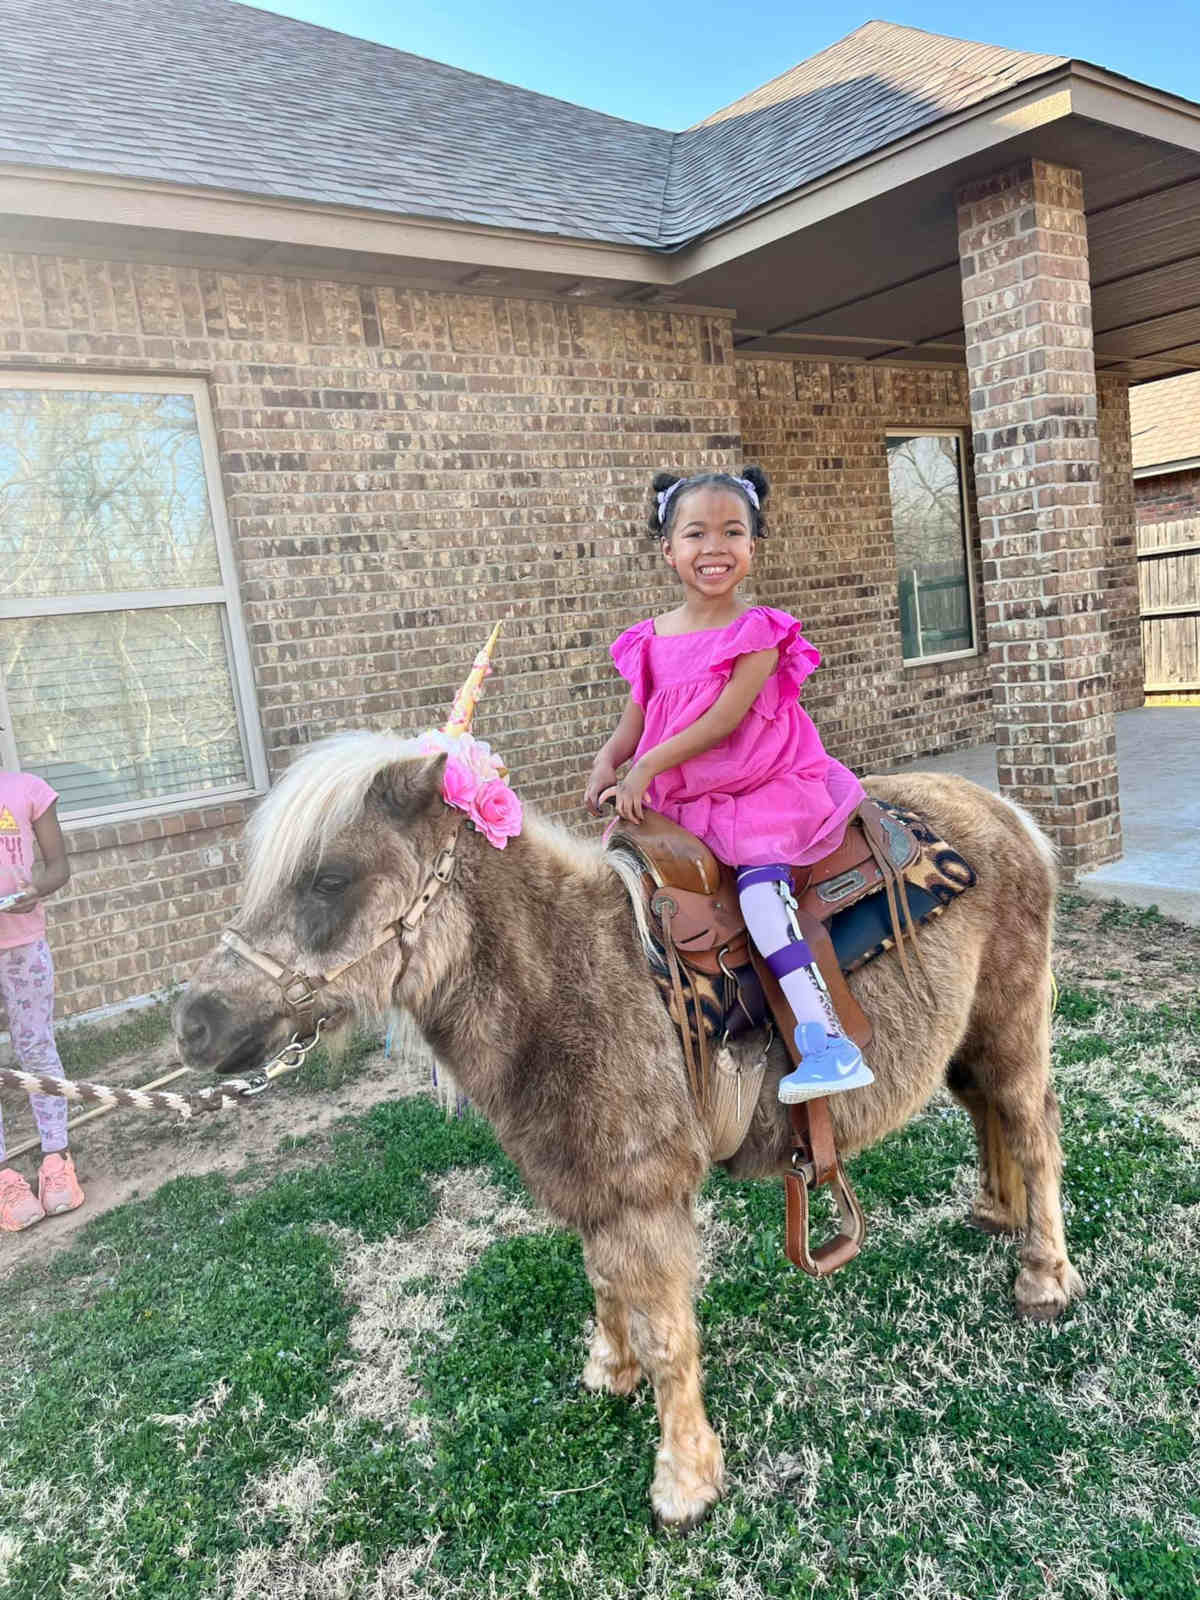 Brielle in pink dress, riding pony